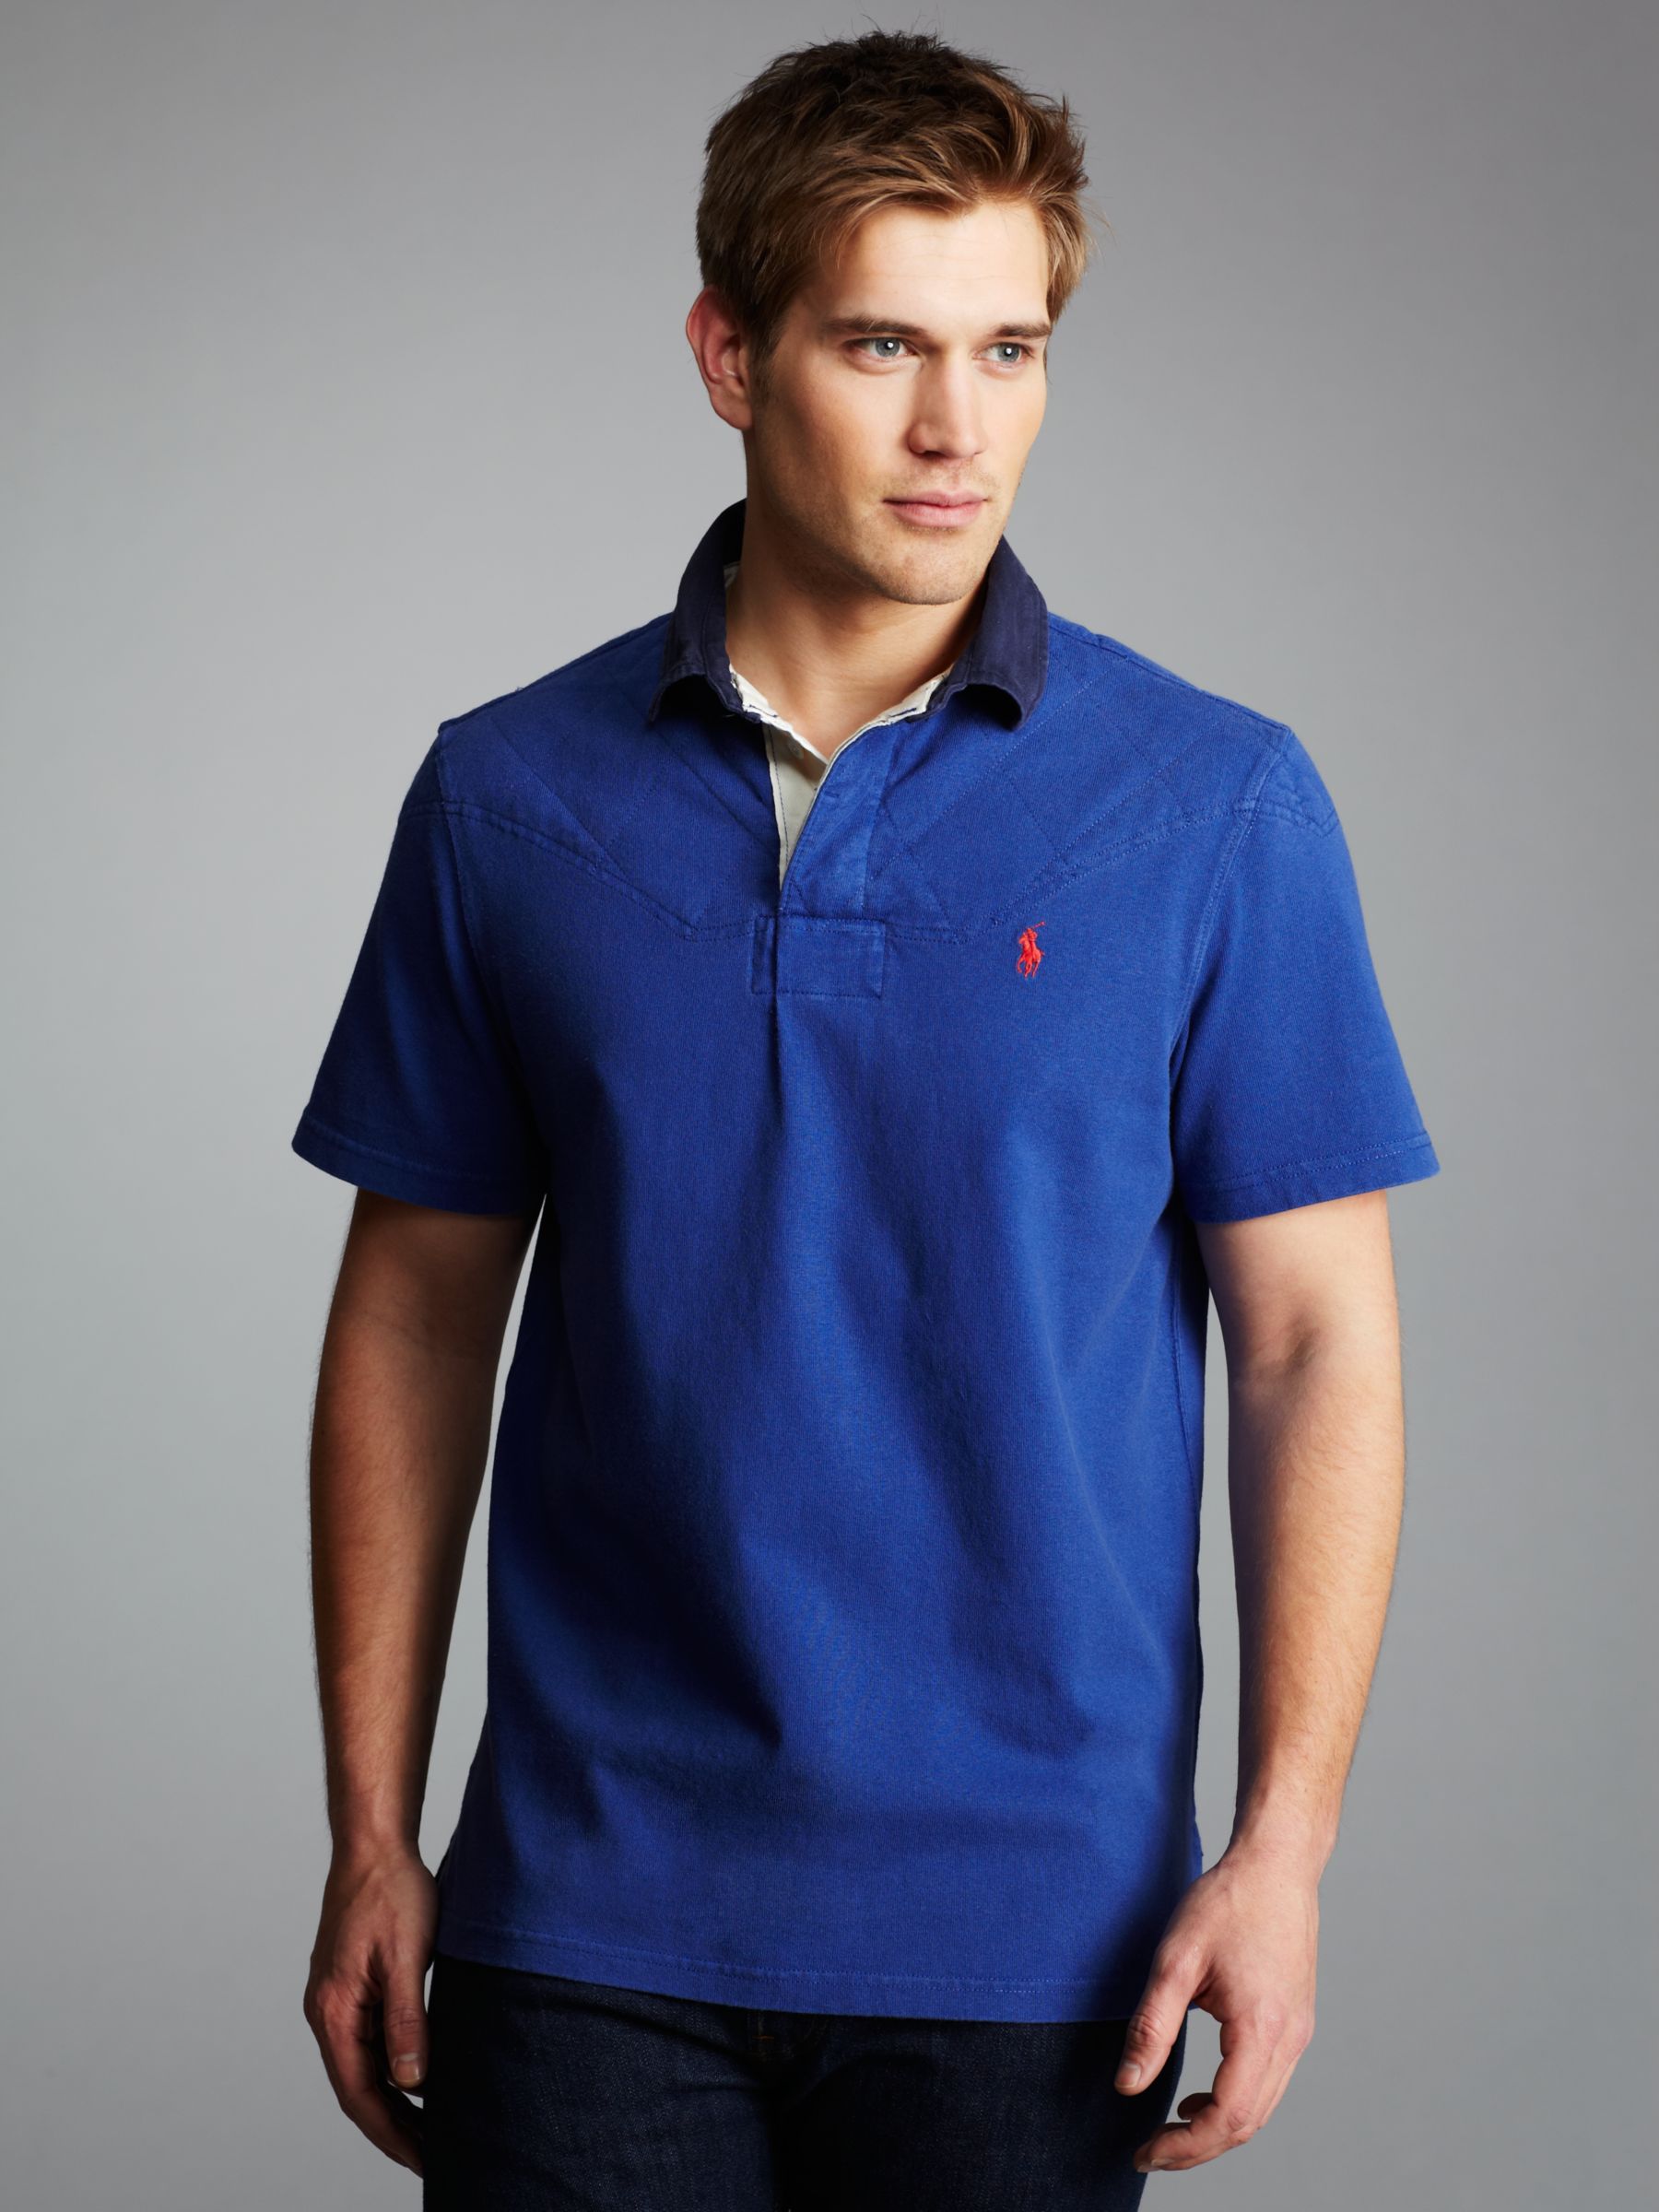 Polo Ralph Lauren Quilted Rugby Shirt, Marlin Blue